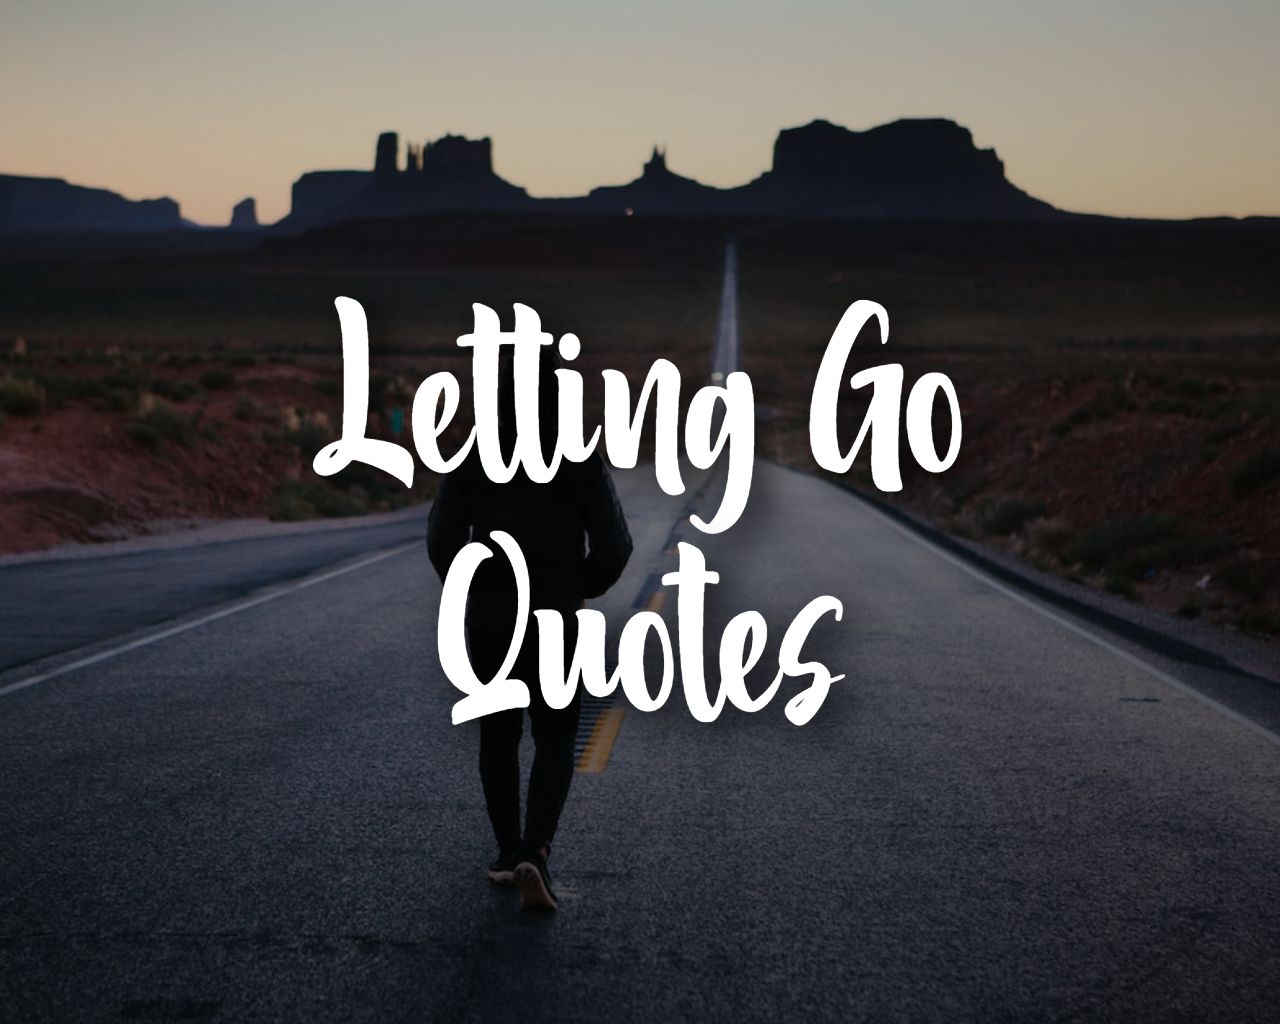 quotes about moving on from the past and letting go